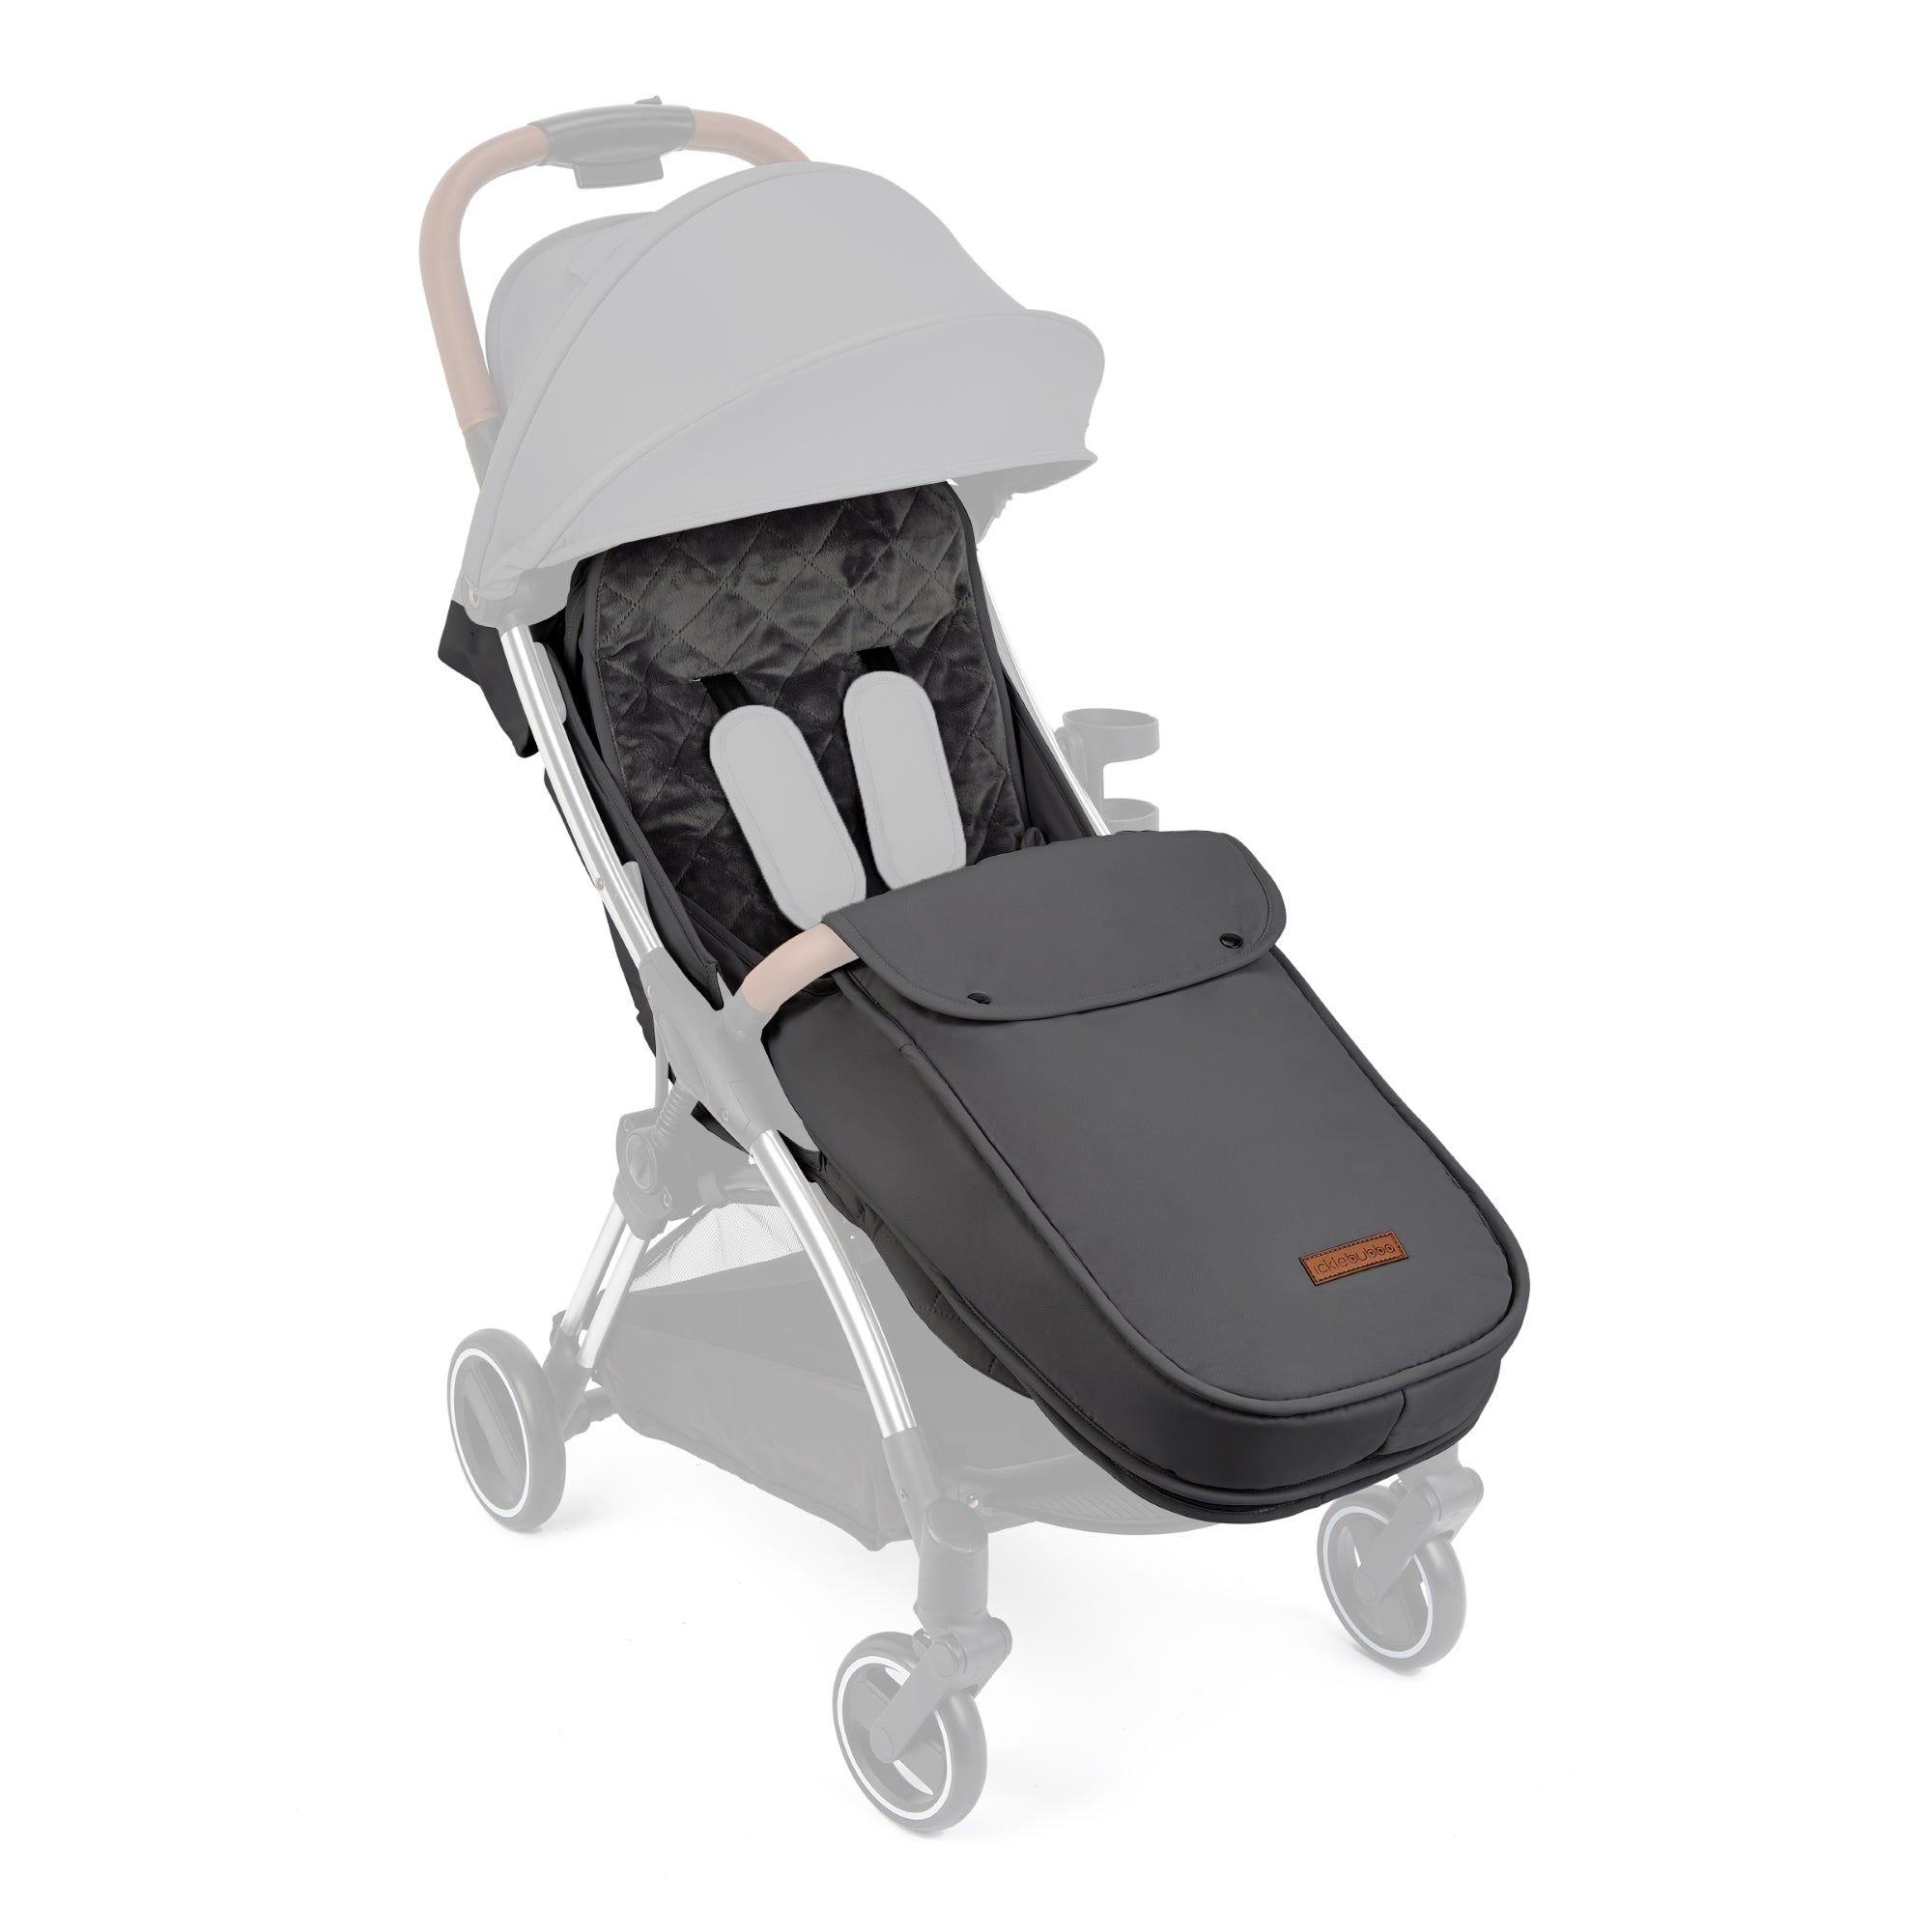 Best footmuff for prams and pushchairs 2023